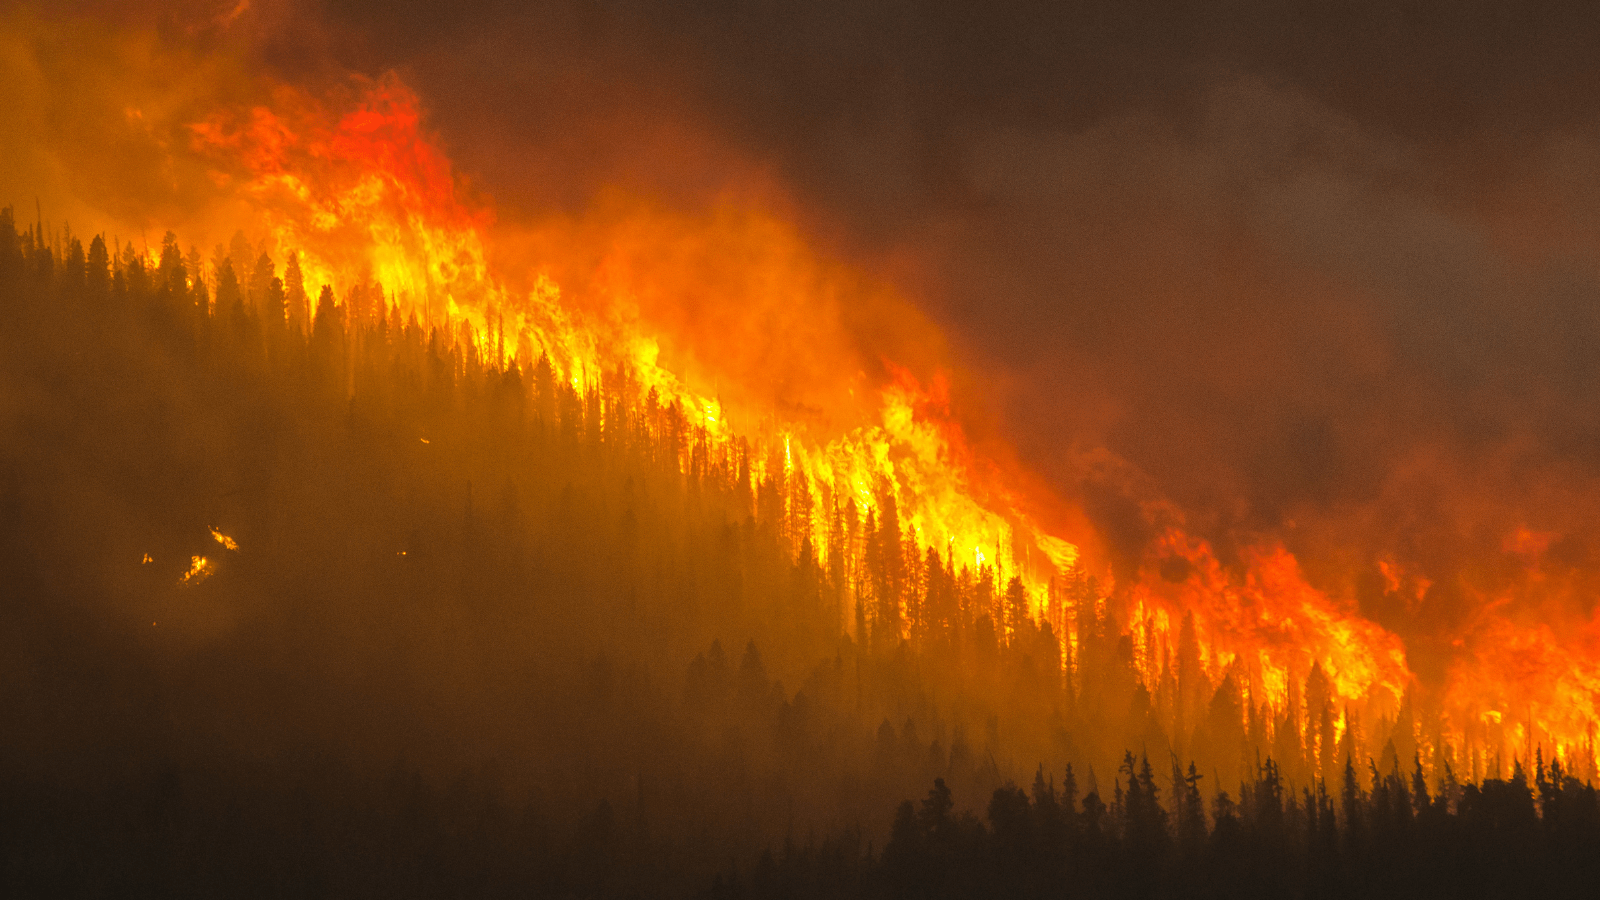 Wildfire rages in a forest.